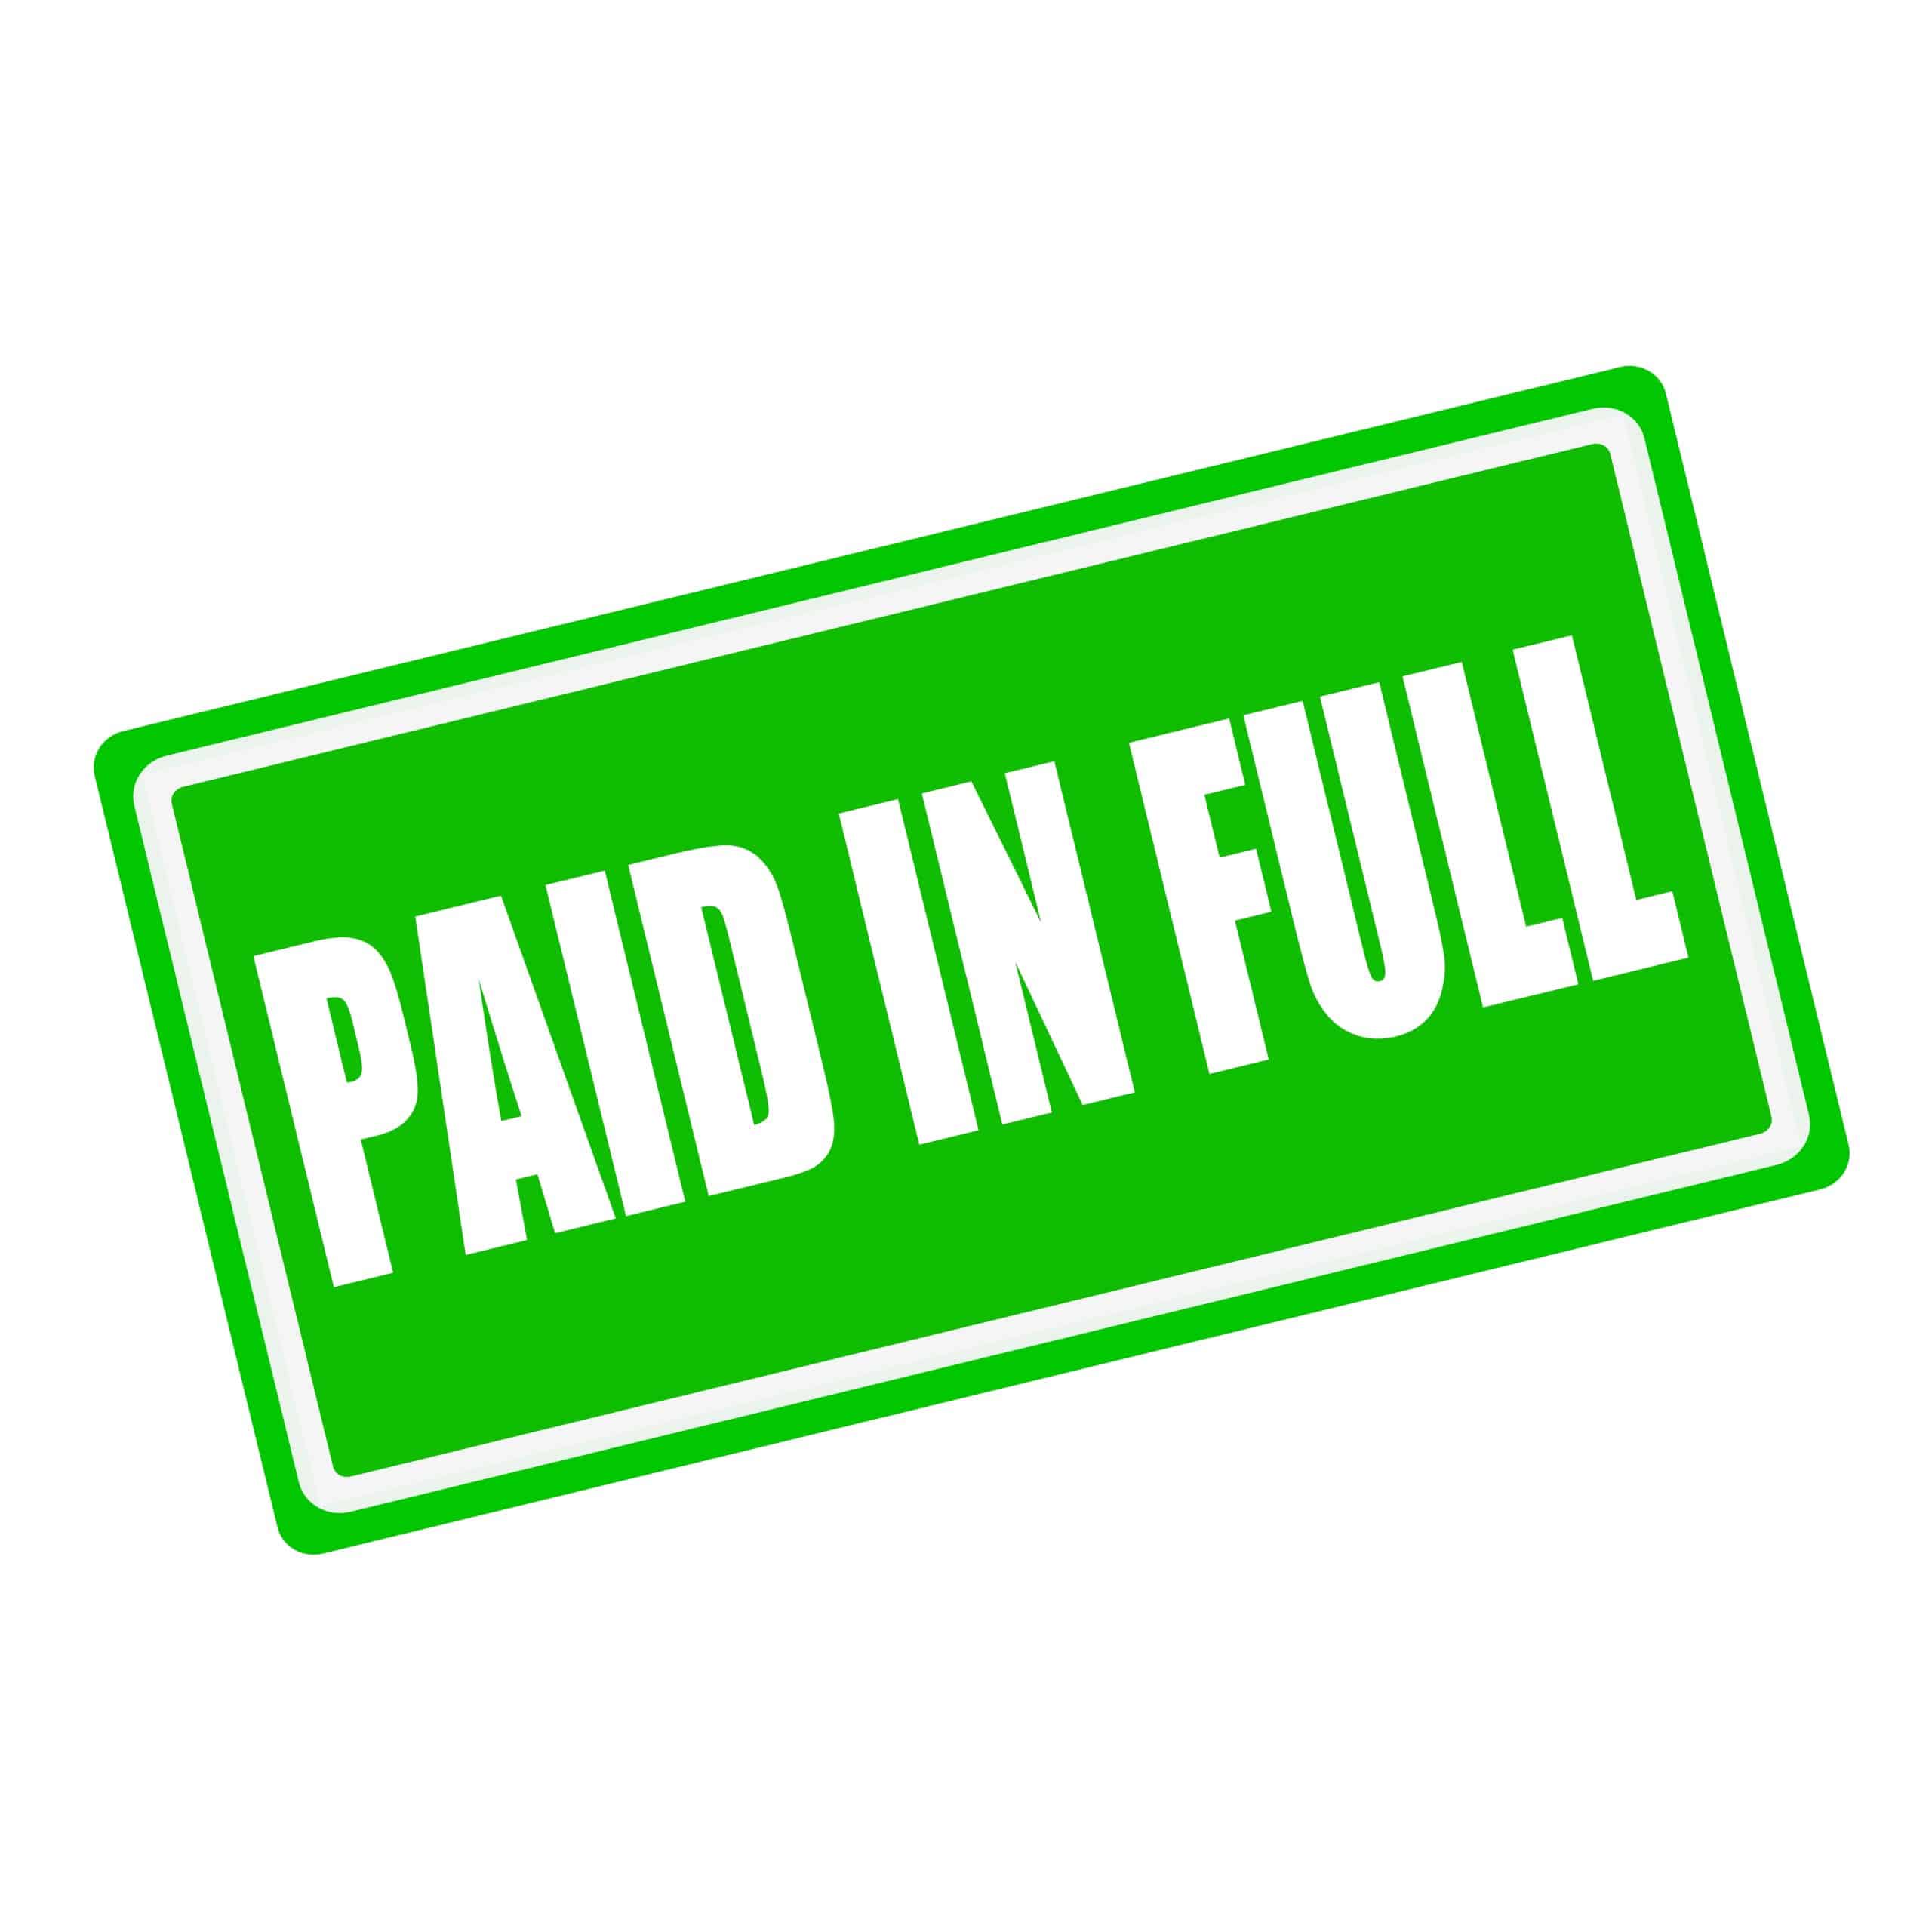 Paid in full white stamp text on green background